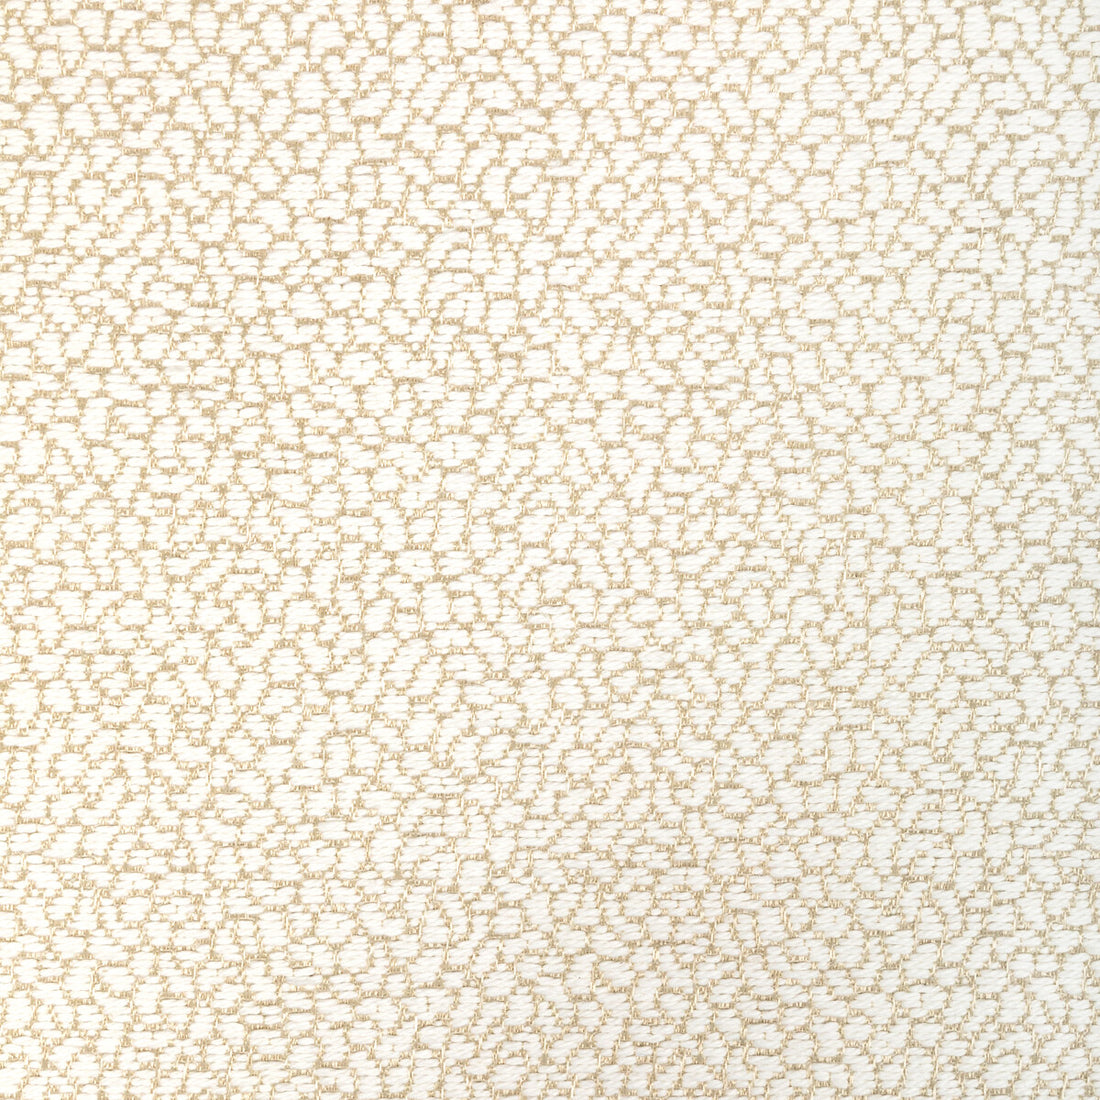 Kravet Design fabric in 36421-161 color - pattern 36421.161.0 - by Kravet Design in the Performance Crypton Home collection